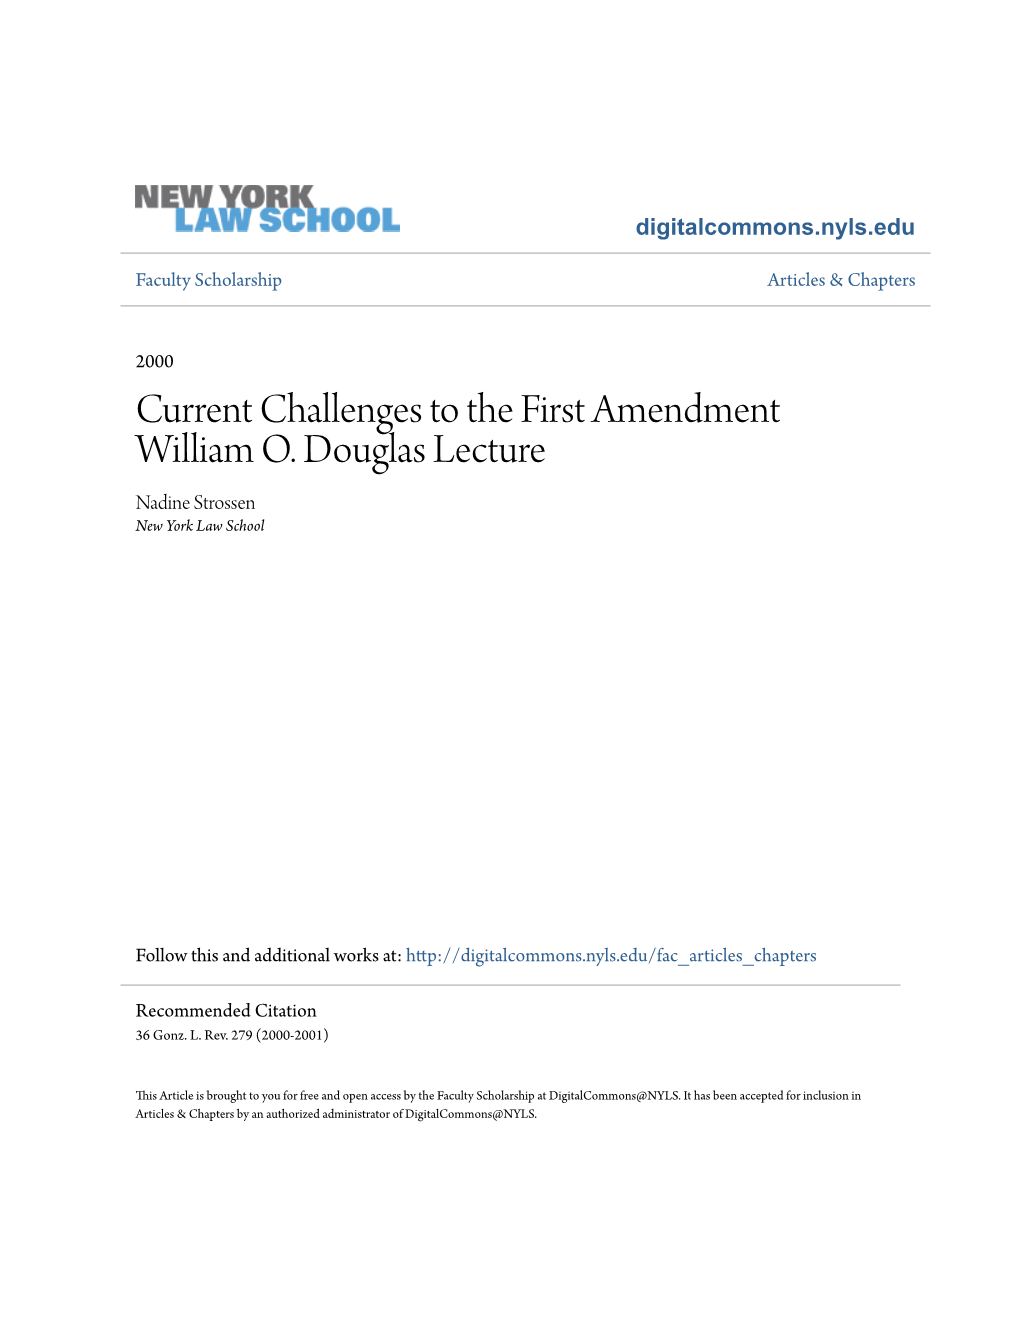 Current Challenges to the First Amendment William O. Douglas Lecture Nadine Strossen New York Law School